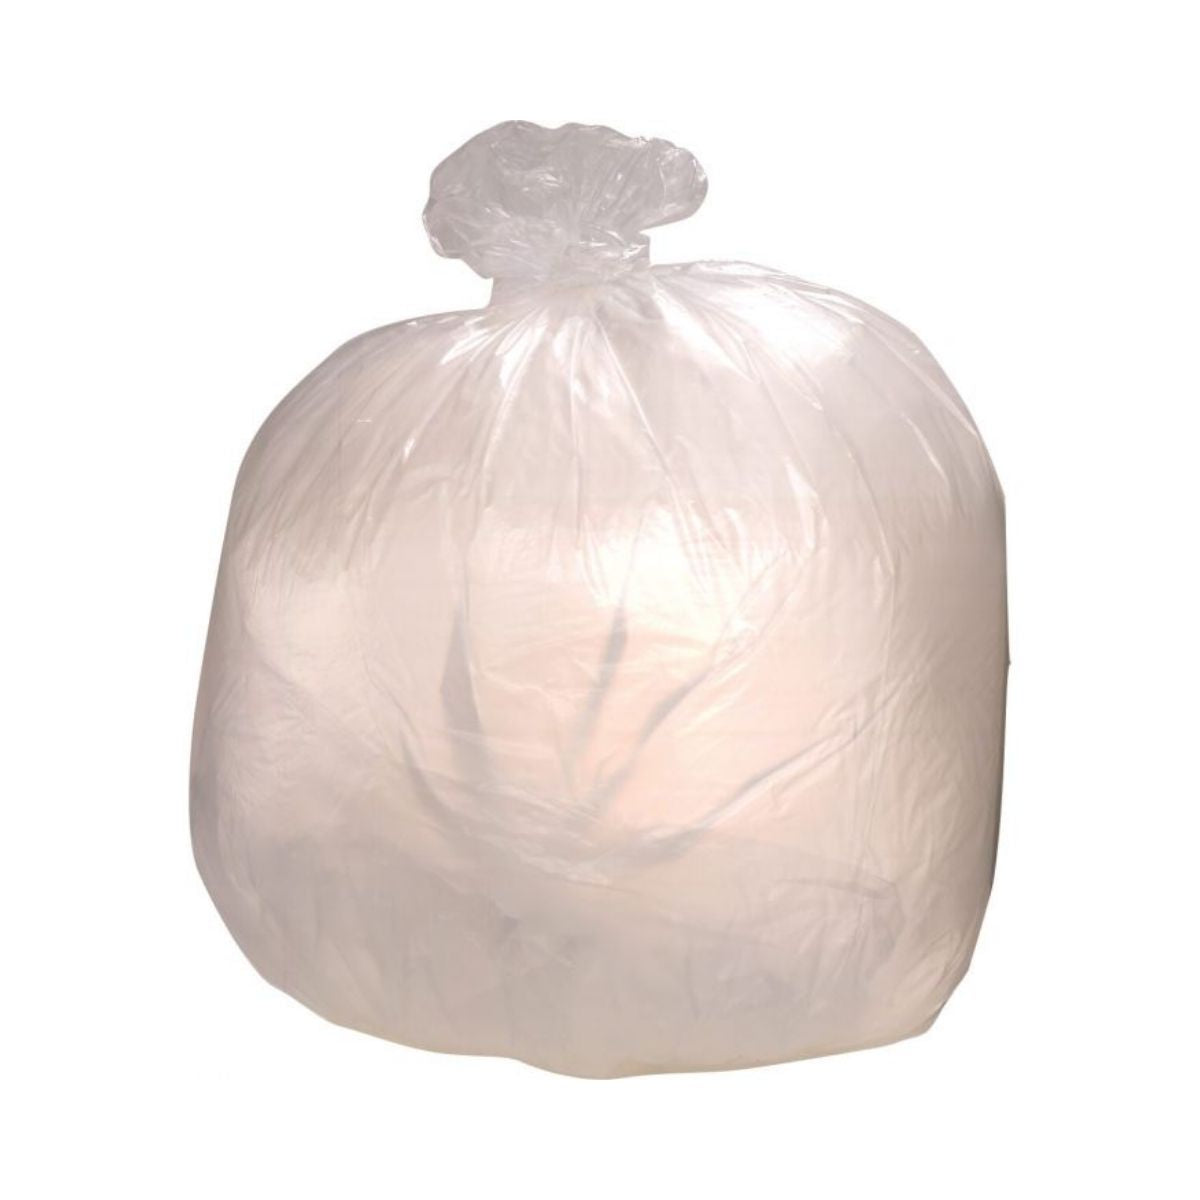 1000/Case) 15 Gallon 8 Micron 24 x 33 High Density Can Liner Clear